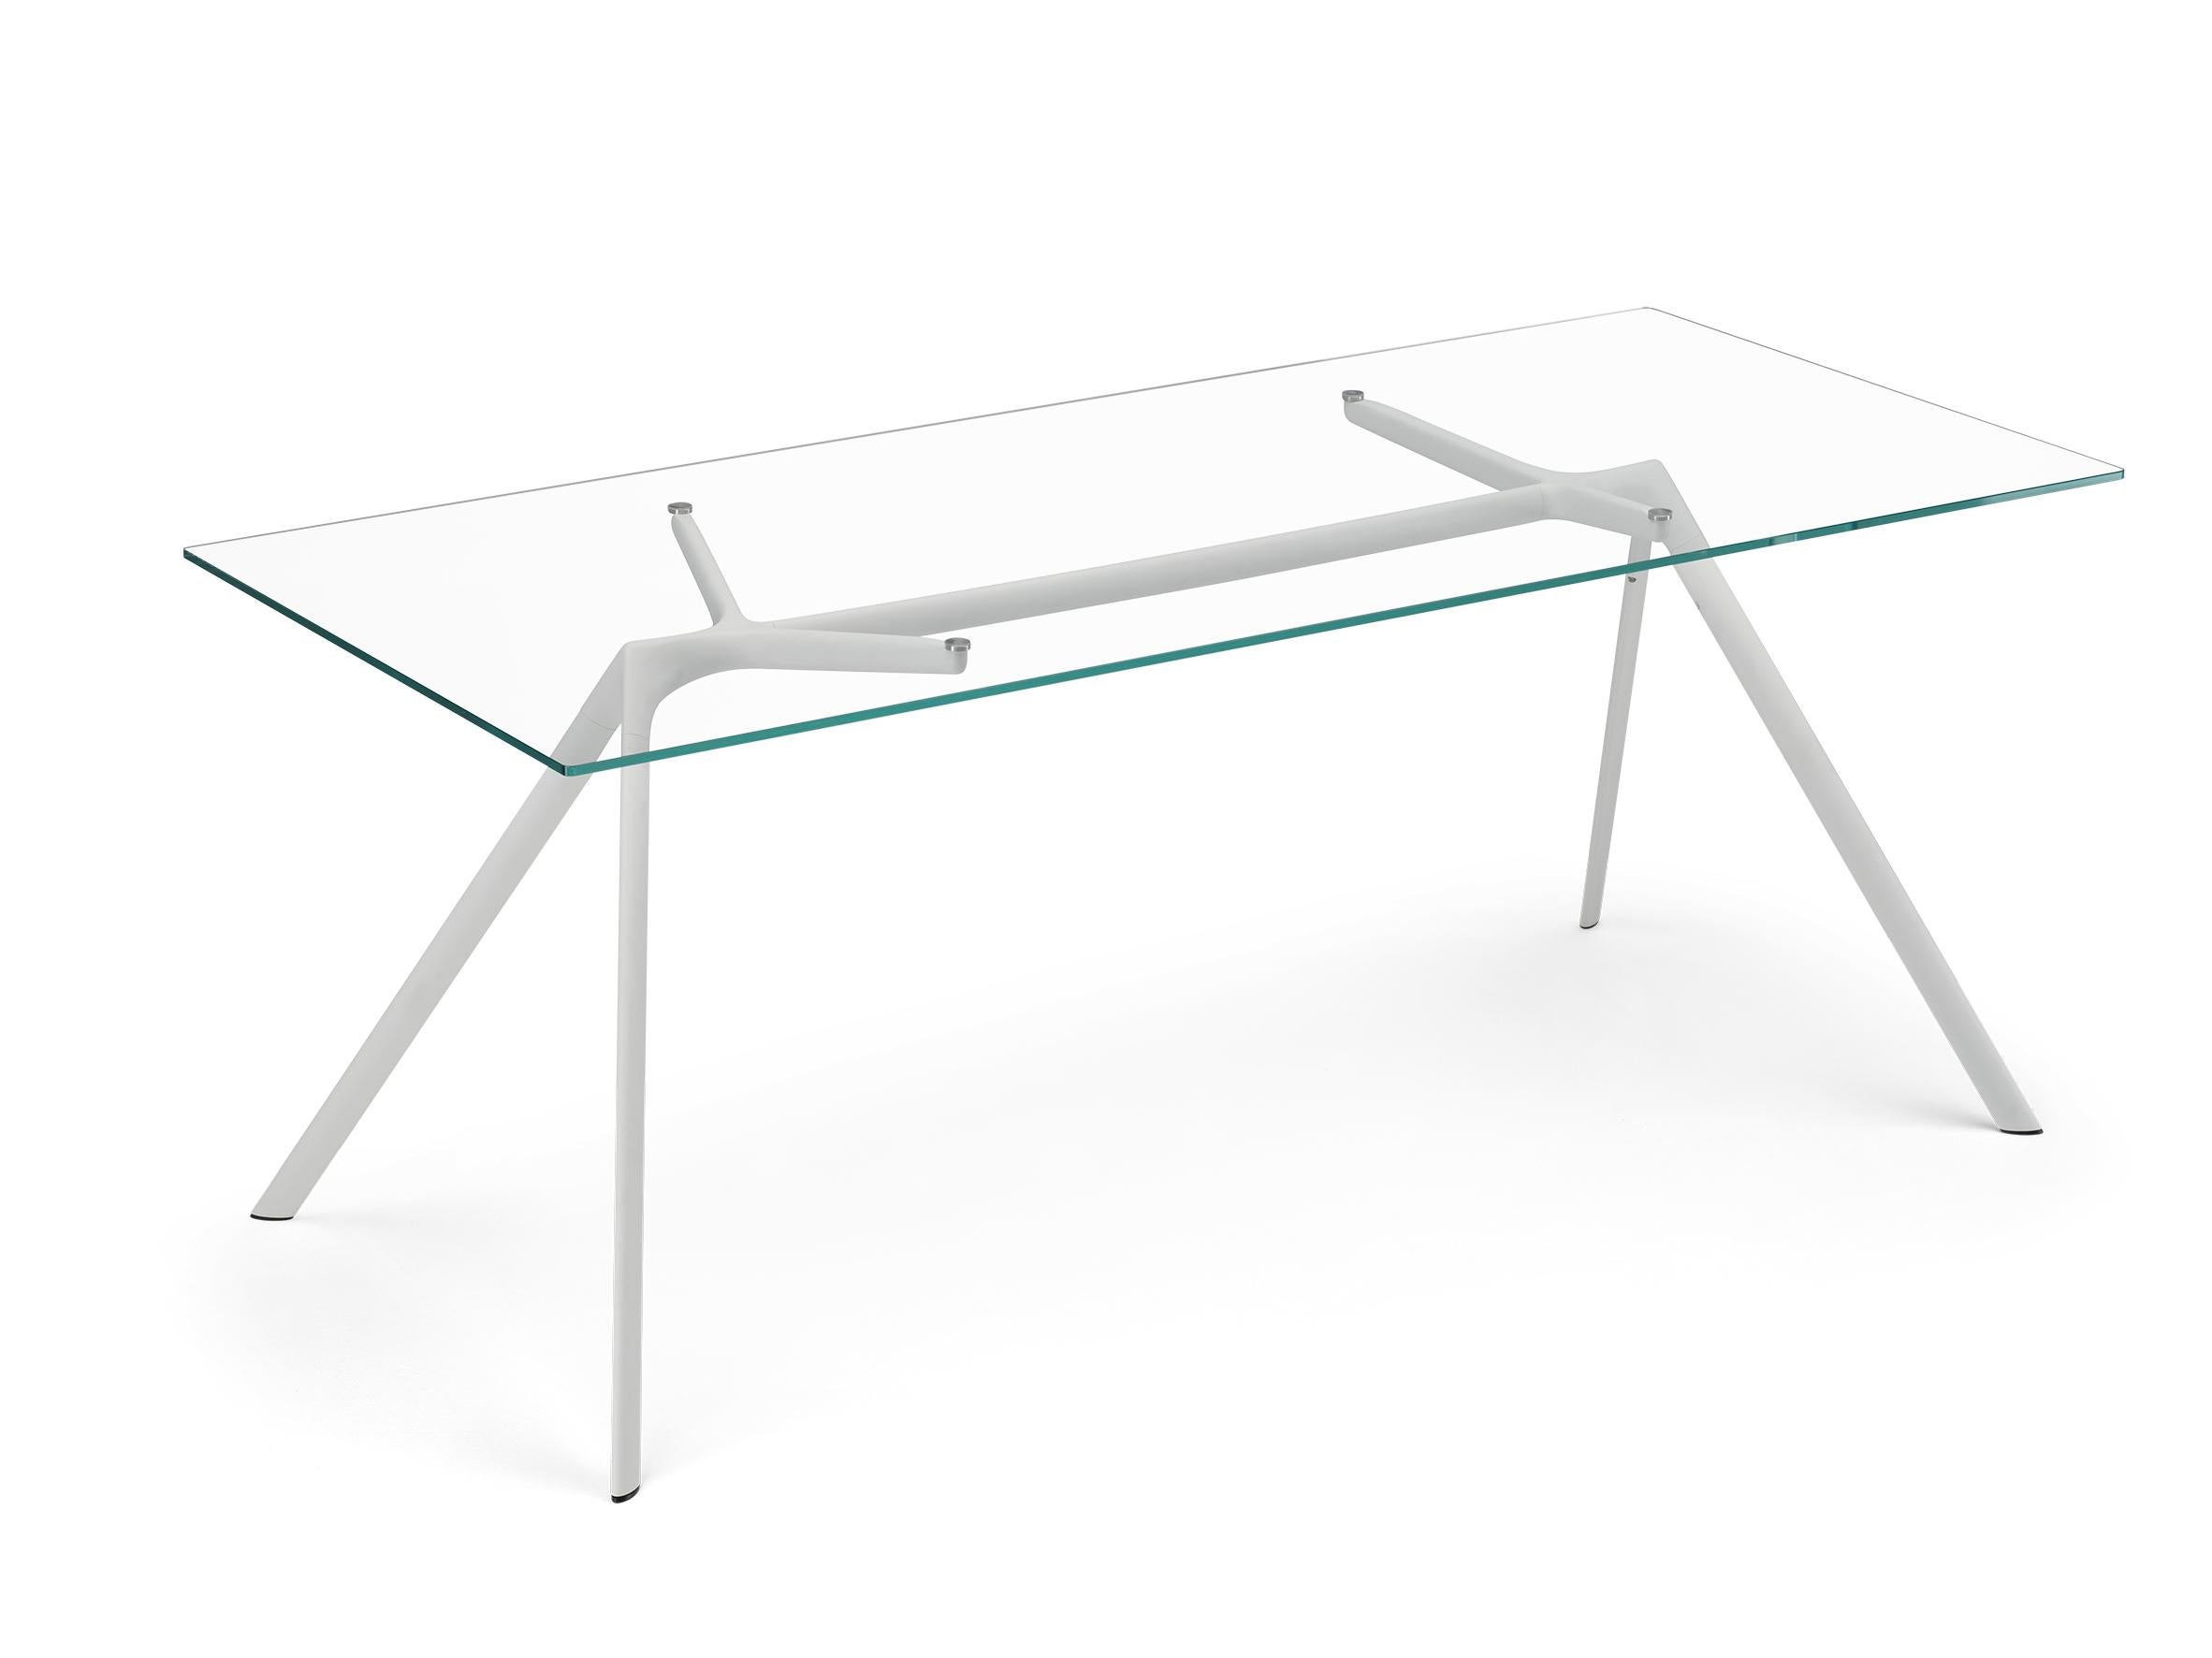 Alias Large Dry 45A Table in Glass Top with White Lacquered Aluminium Frame by Alberto Meda

Table with structure made of lacquered aluminium elements. Top in extra light tempered glass, thickness 10 mm. Available with predisposition for cable